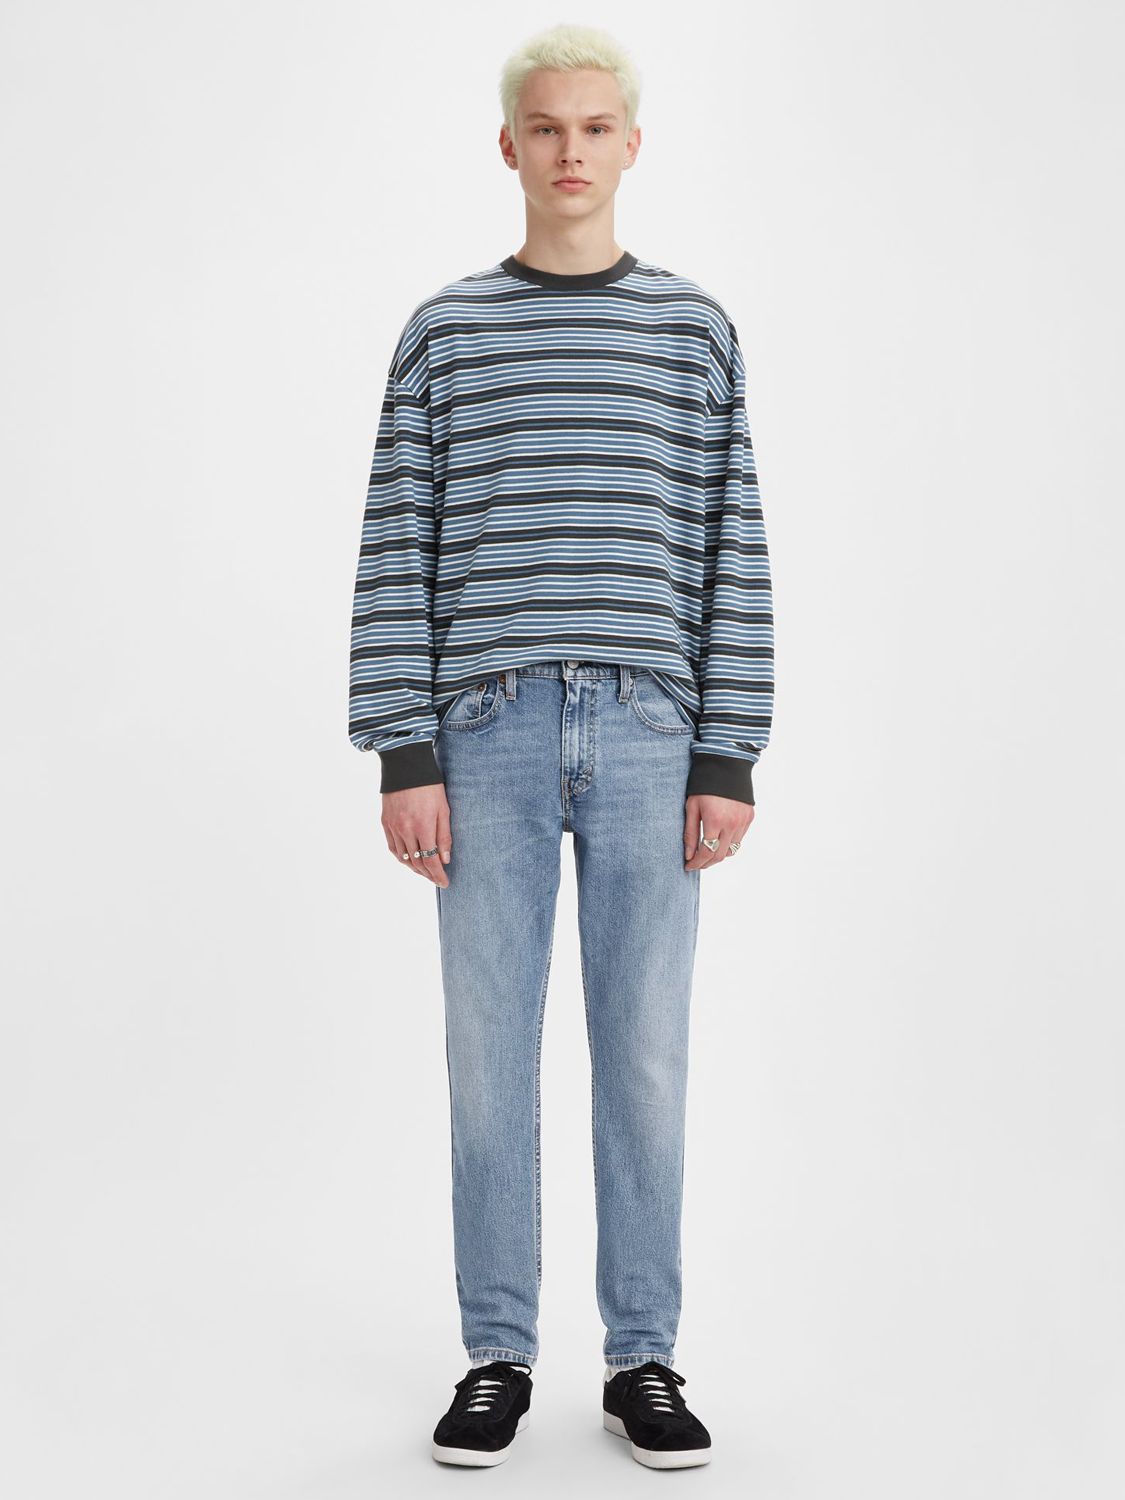 Levi's 512 Slim Tapered Jeans, Z6989 at John Lewis & Partners